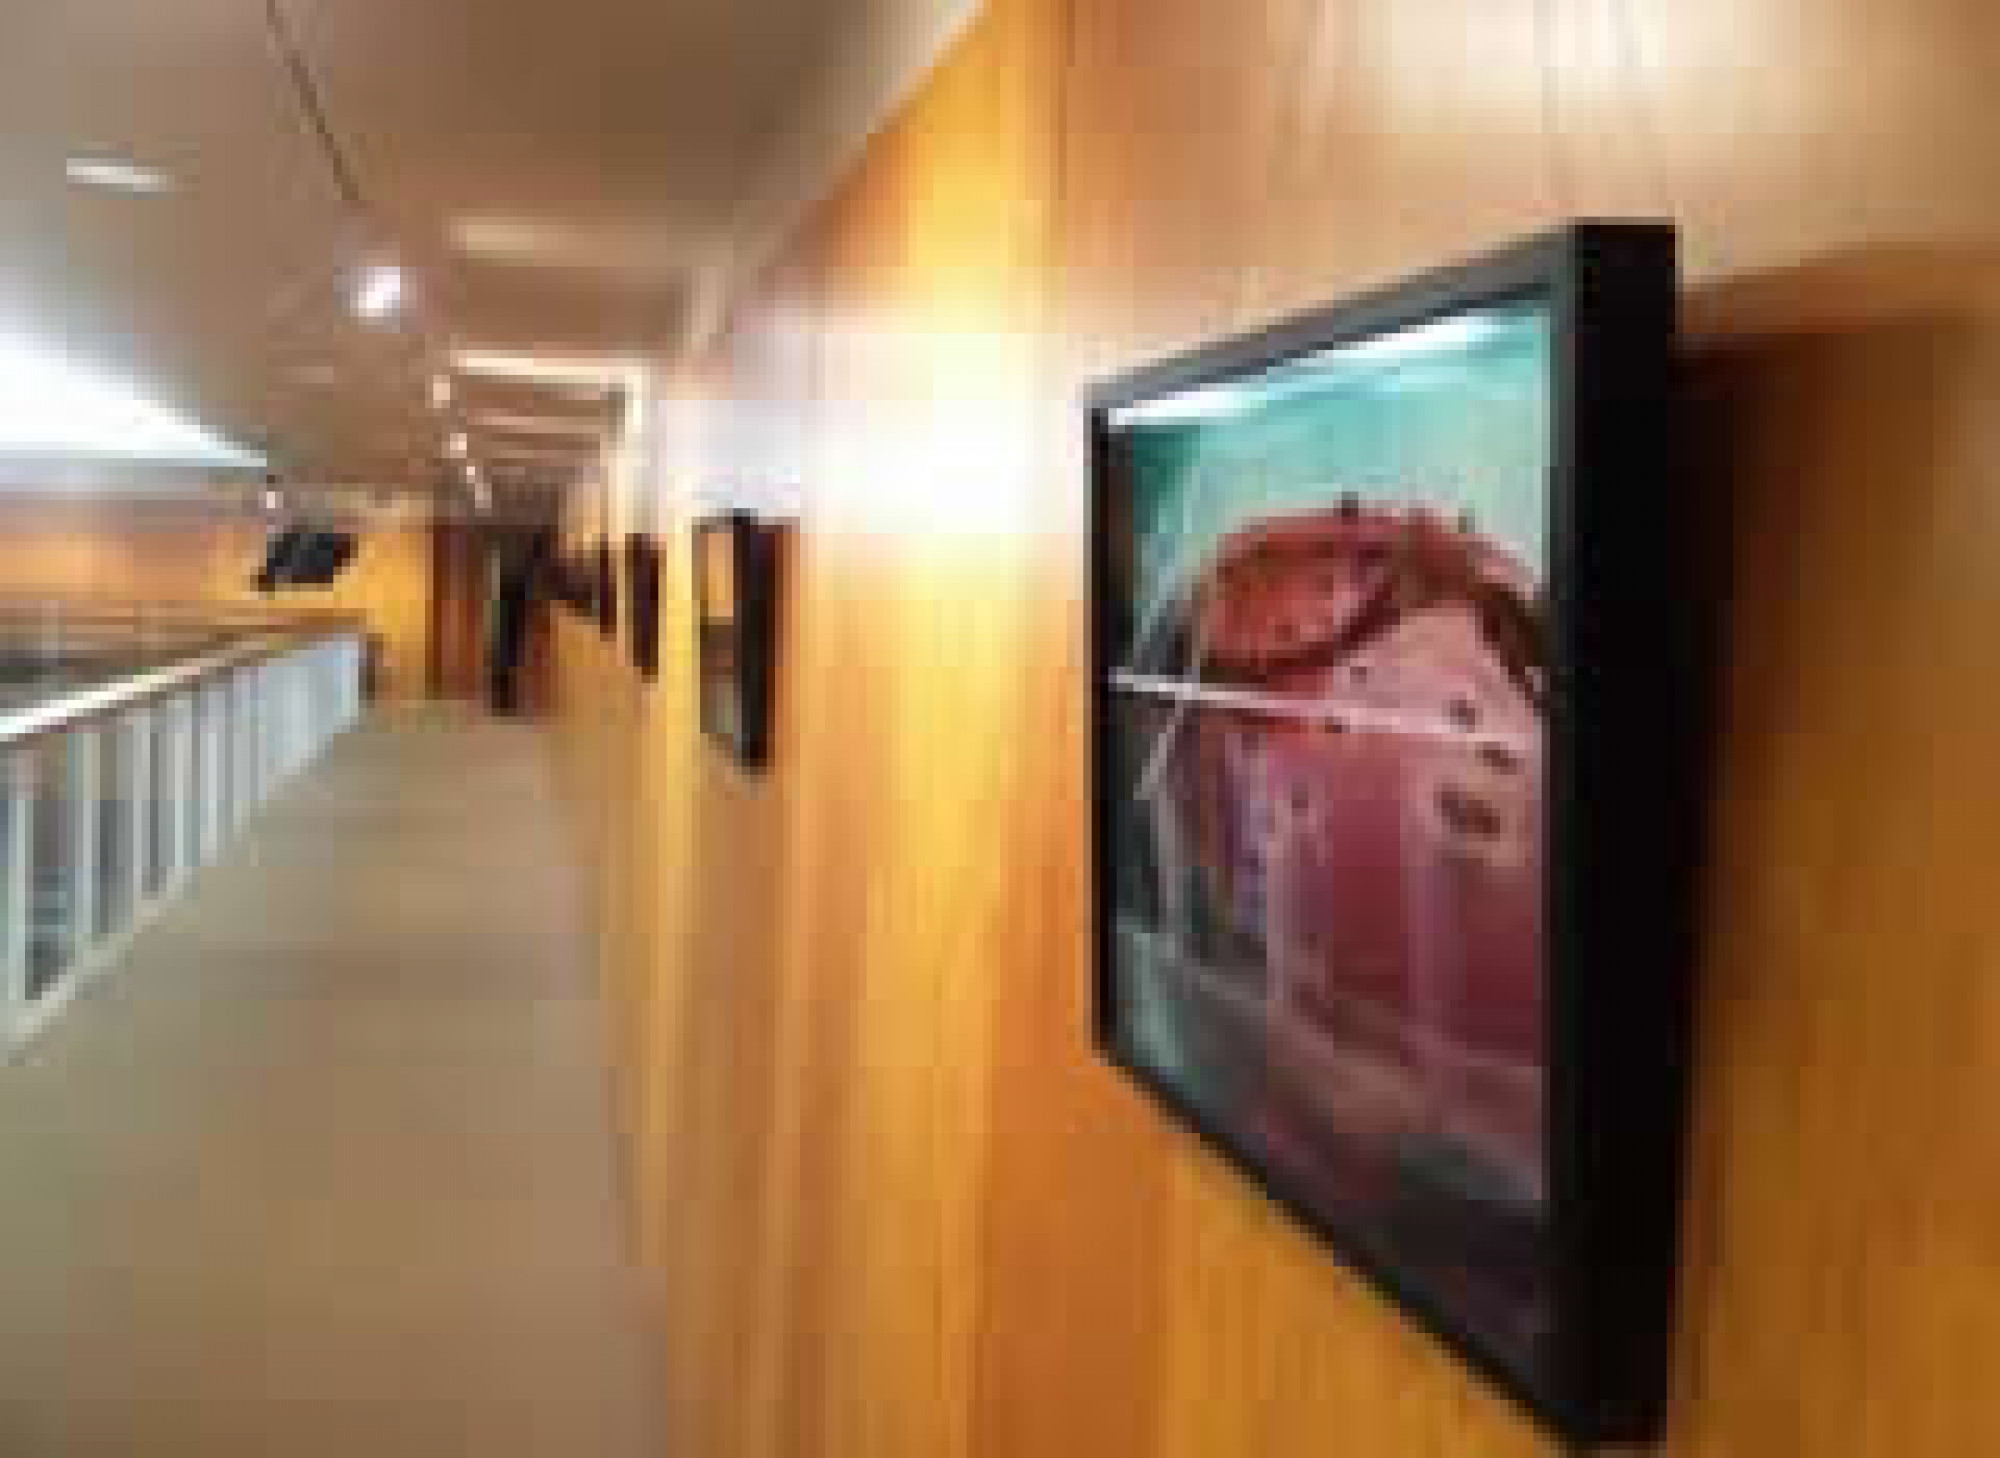 Gallery exhibition in Colyer-Fergusson